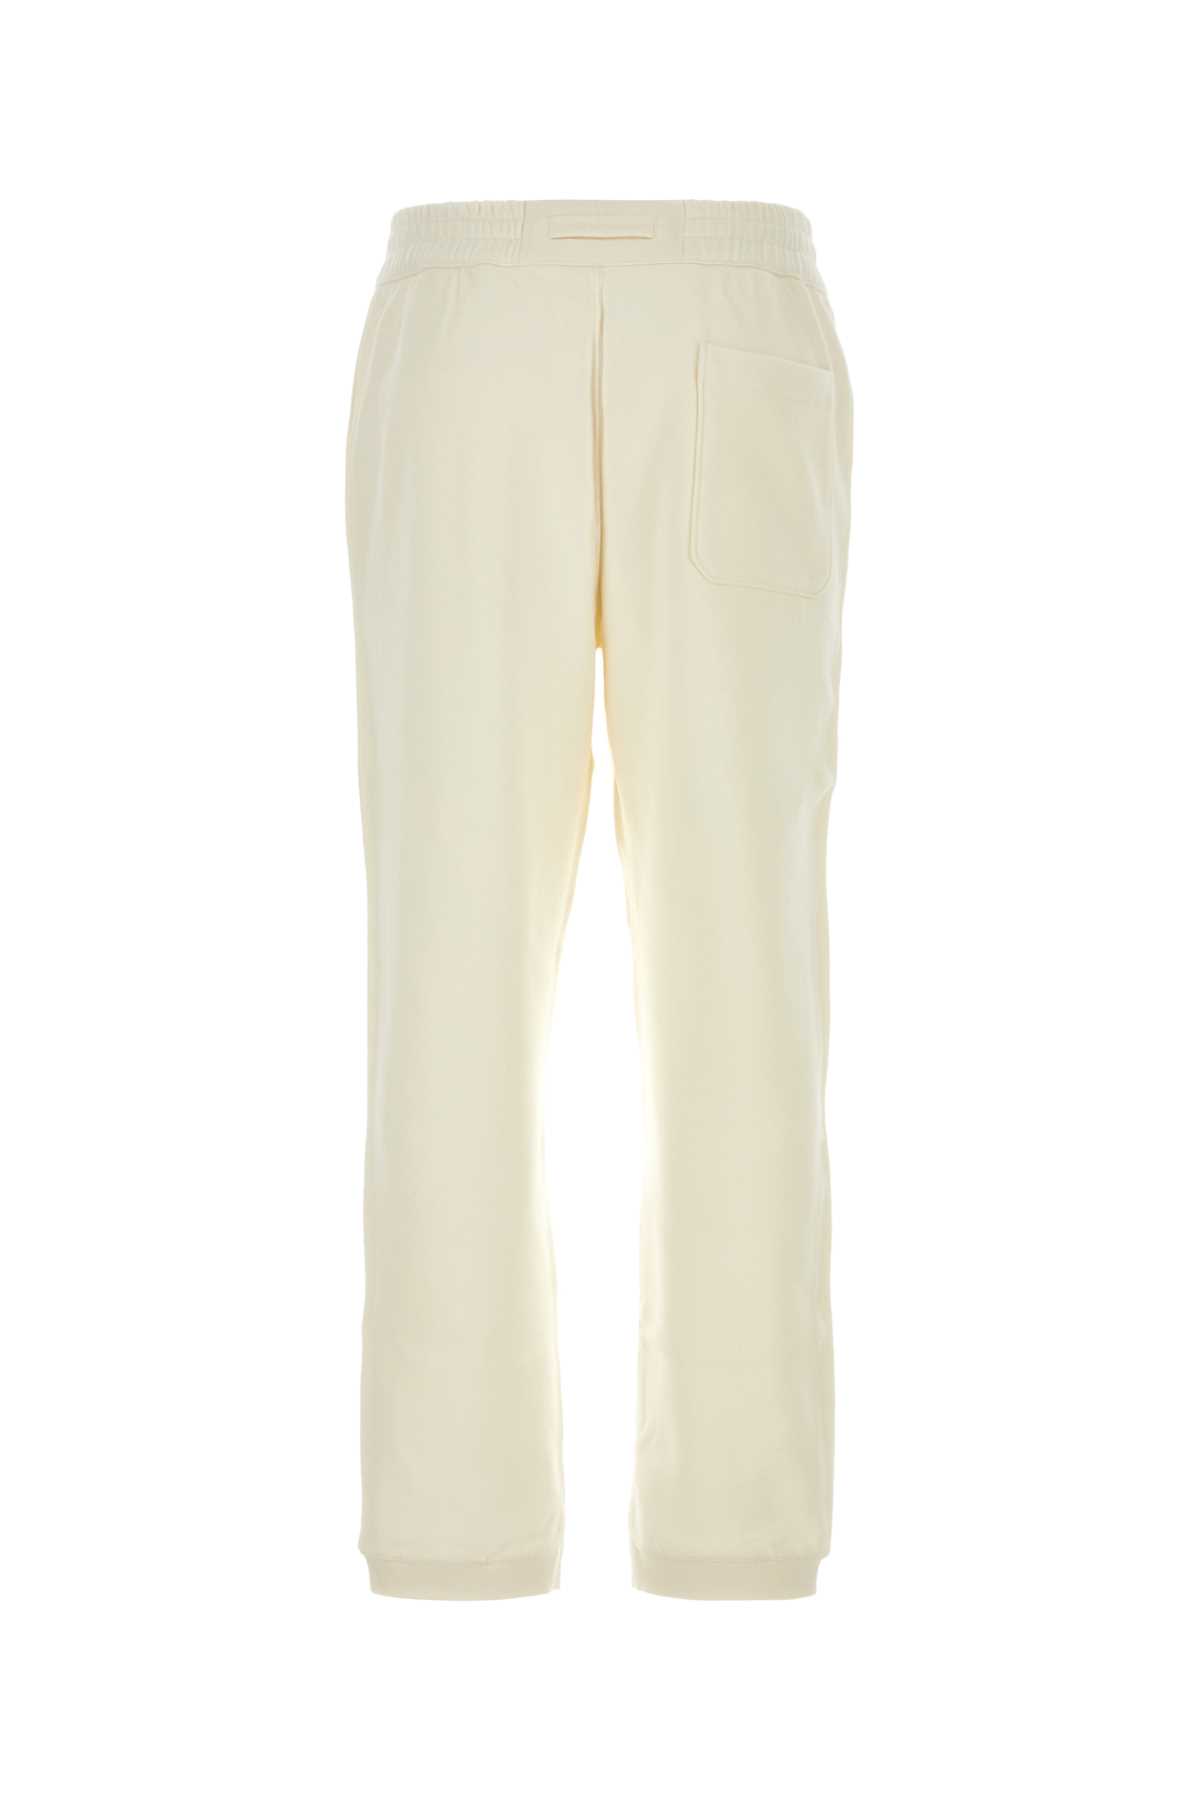 Zegna Ivory Cotton Blend Joggers In N01